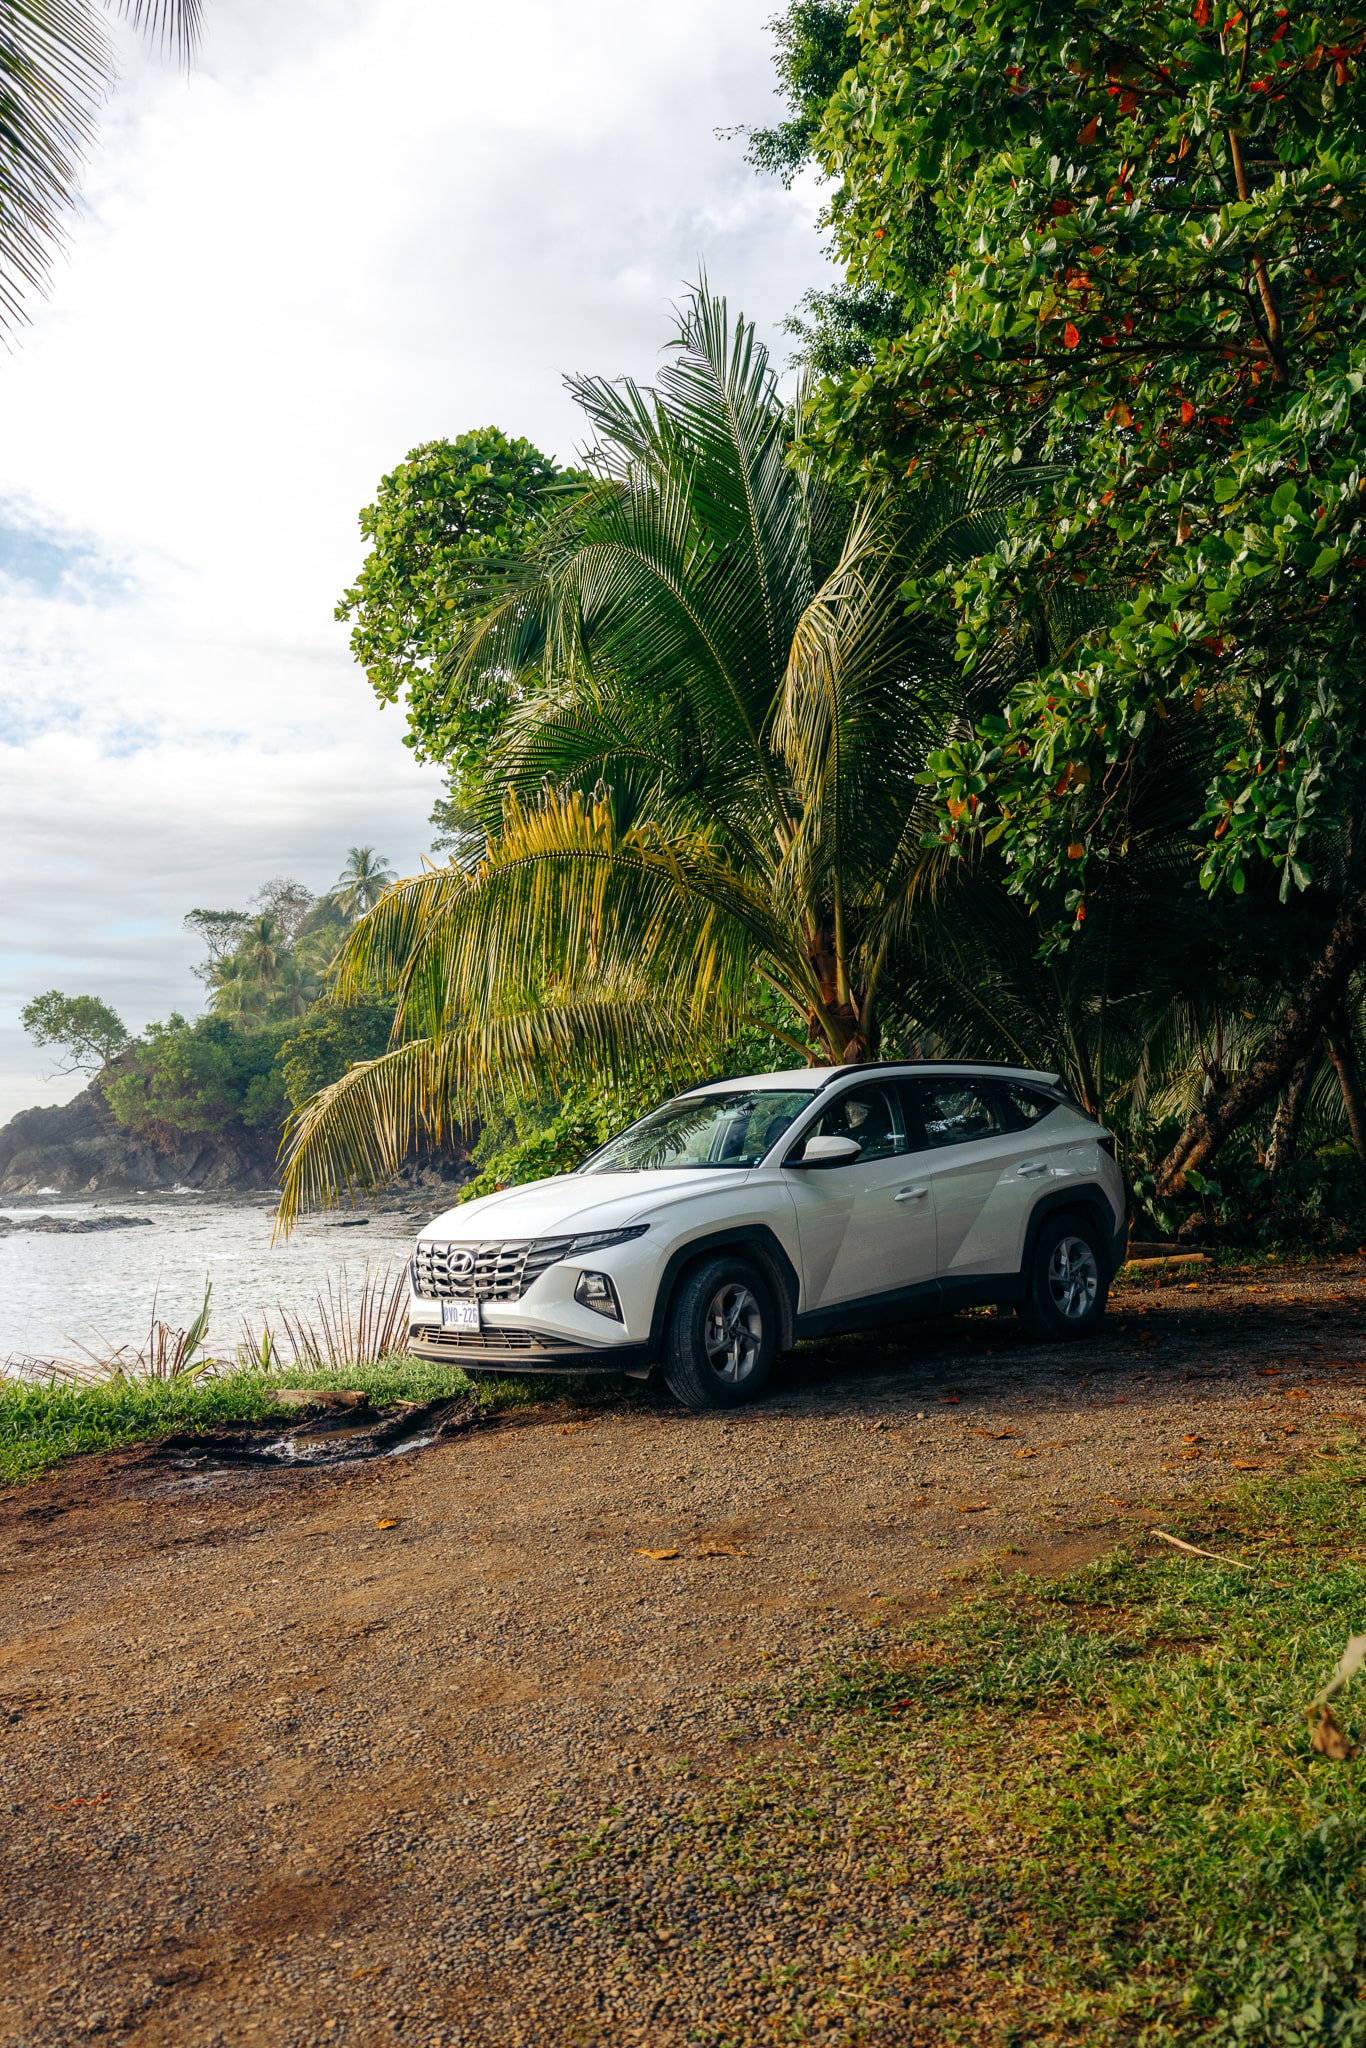 4x4 SUV is the best way to get road trip Costa Rica in 2 weeks